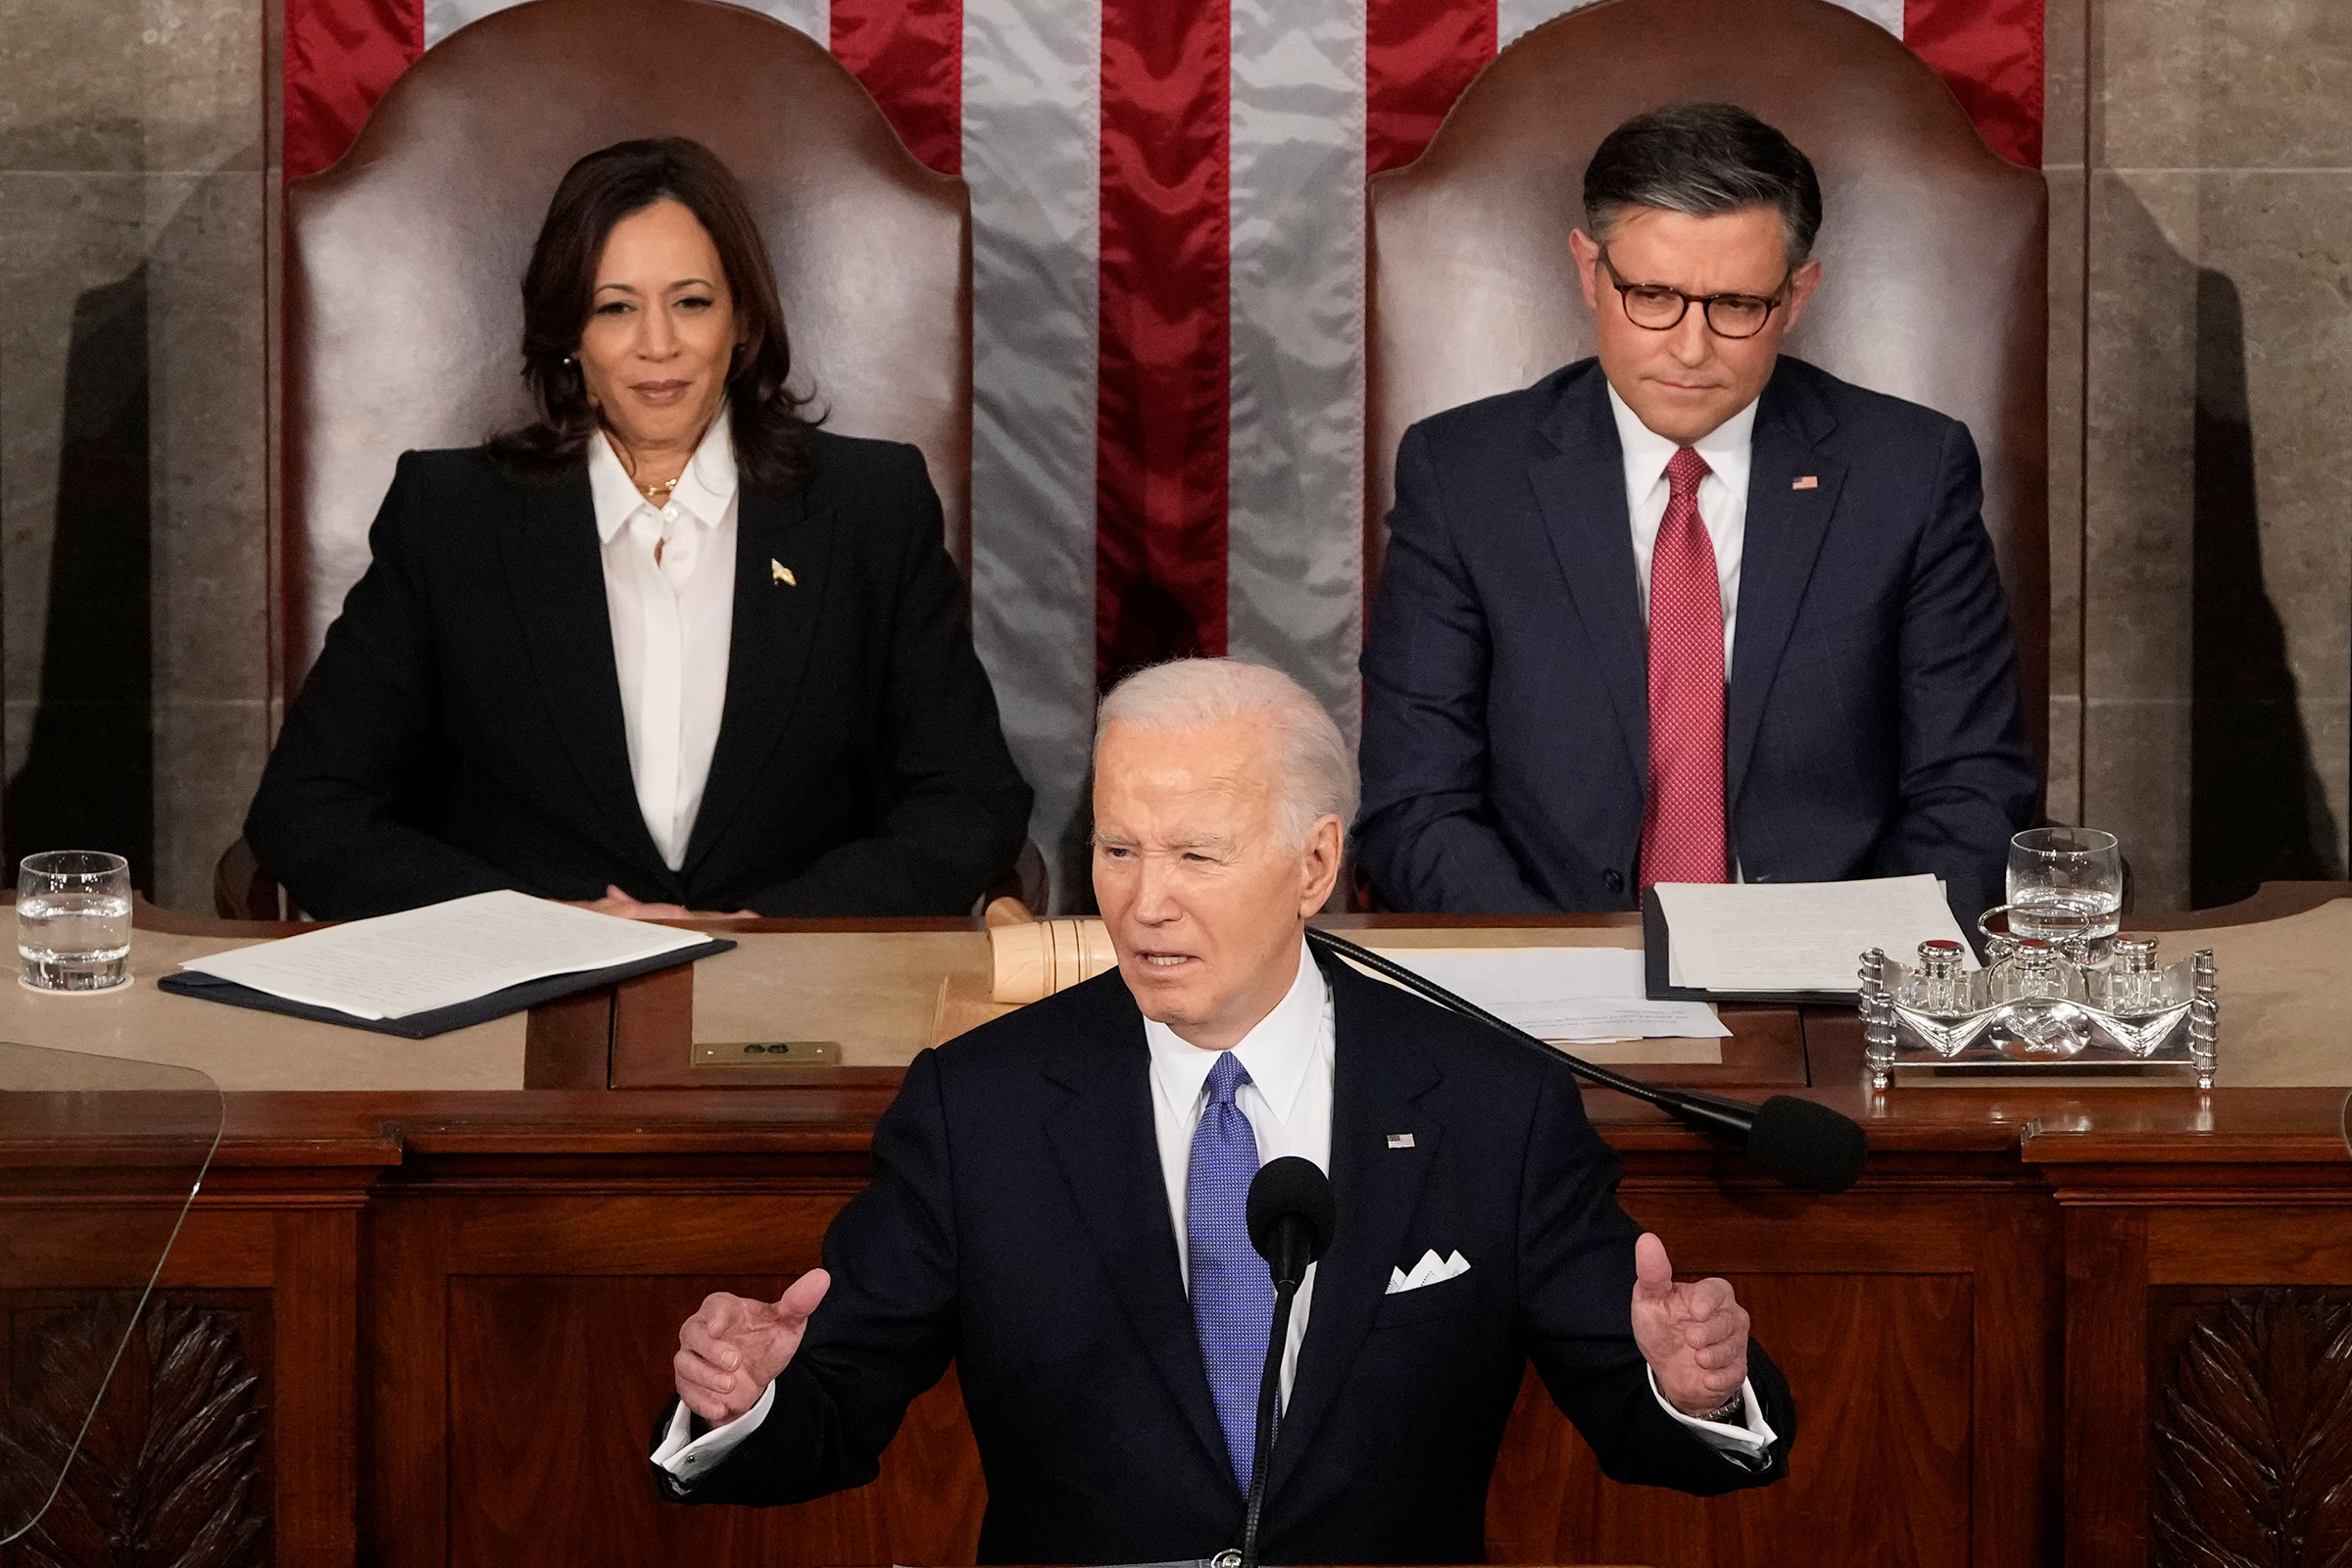 President Joe Biden speaks during the State of the Union address on Capitol Hill.